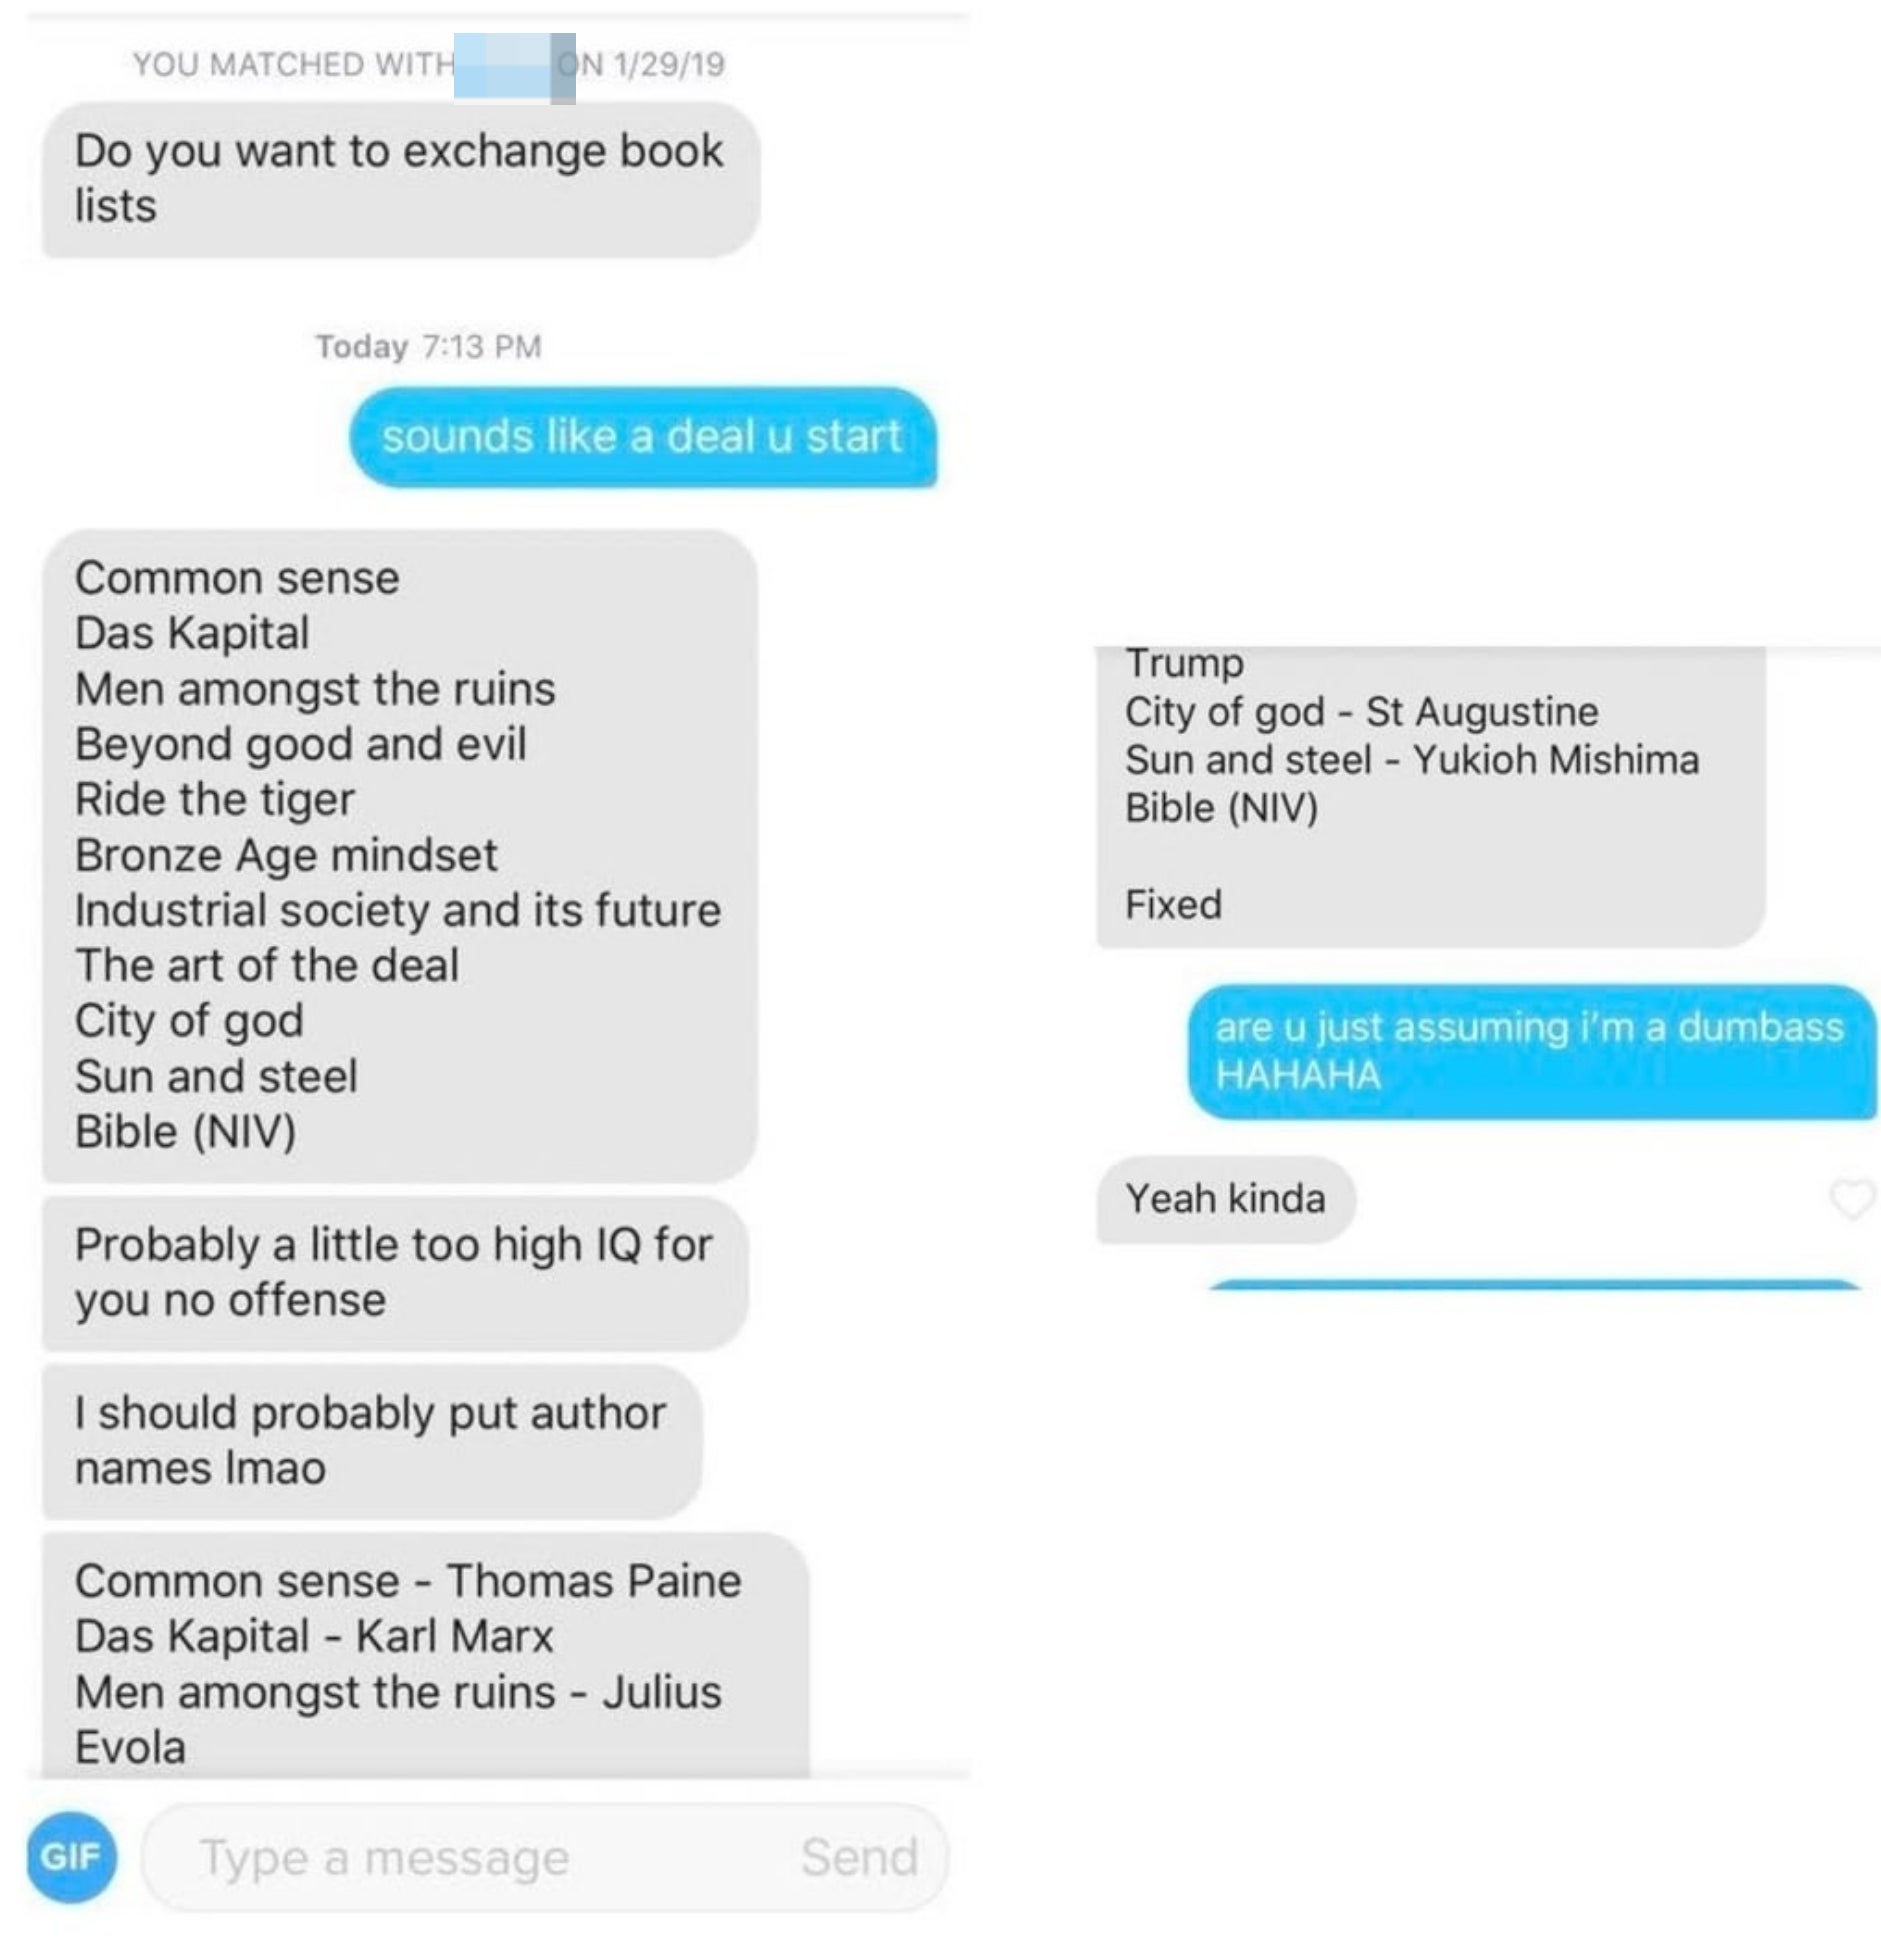 Screenshot of a humorous text exchange with a dating app match discussing book titles with altered funny names